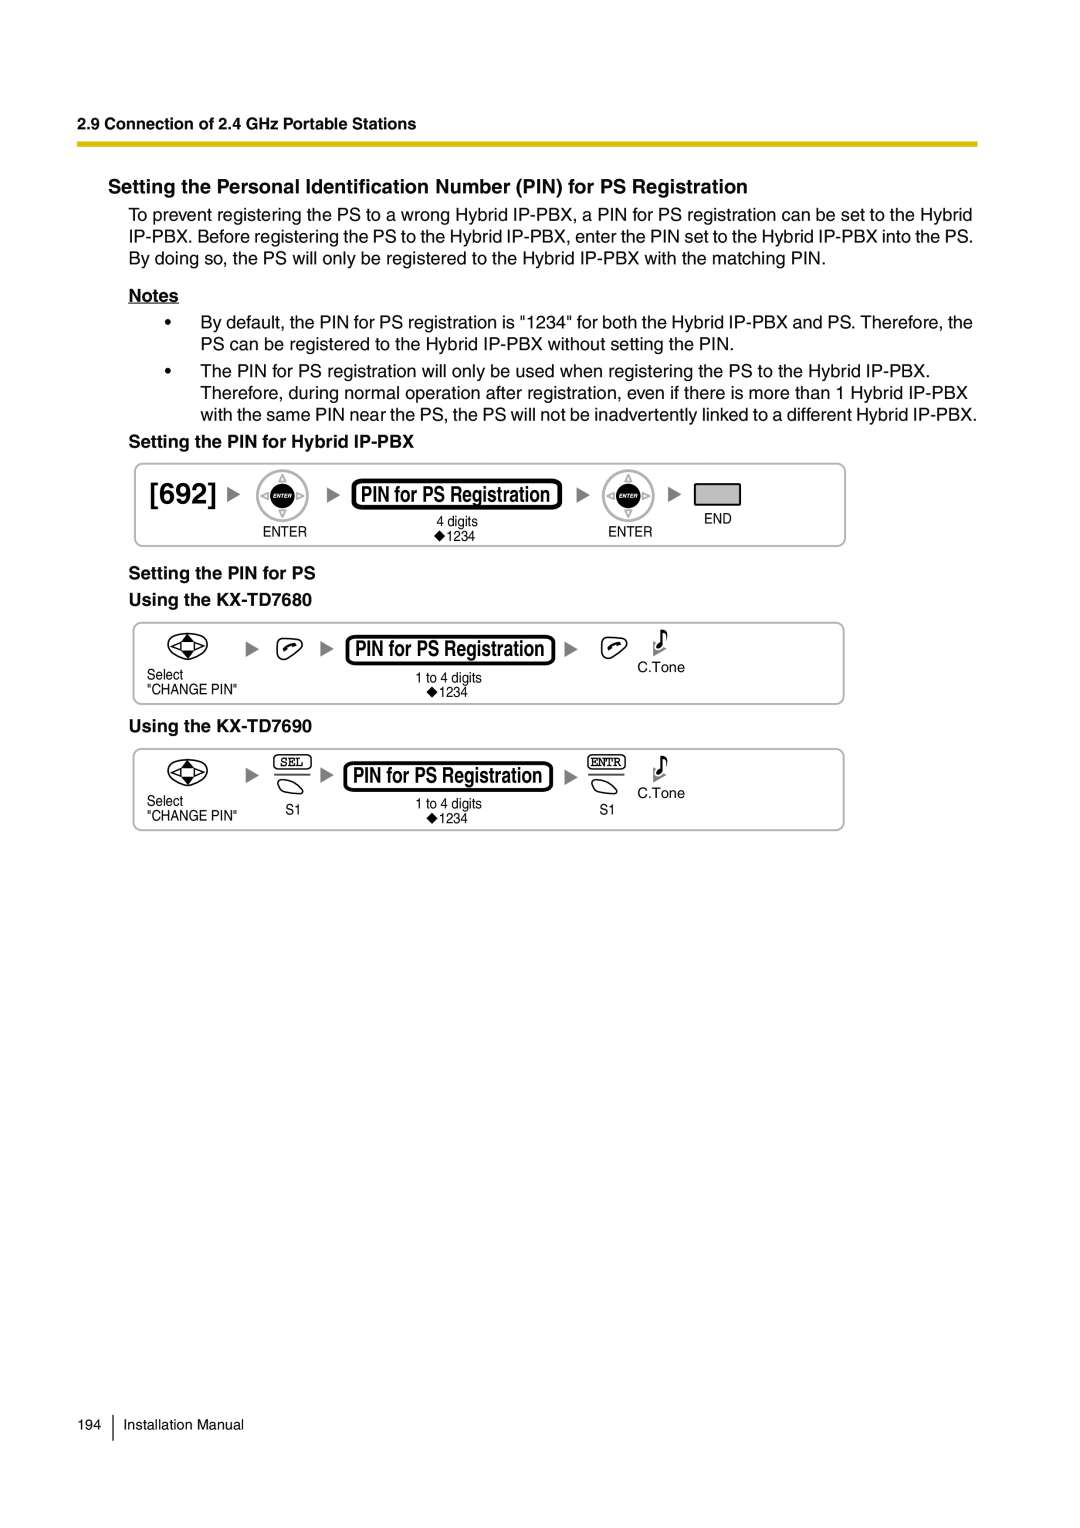 Panasonic KX-TDA100 Setting the Personal Identification Number PIN for PS Registration, Using the KX-TD7690 